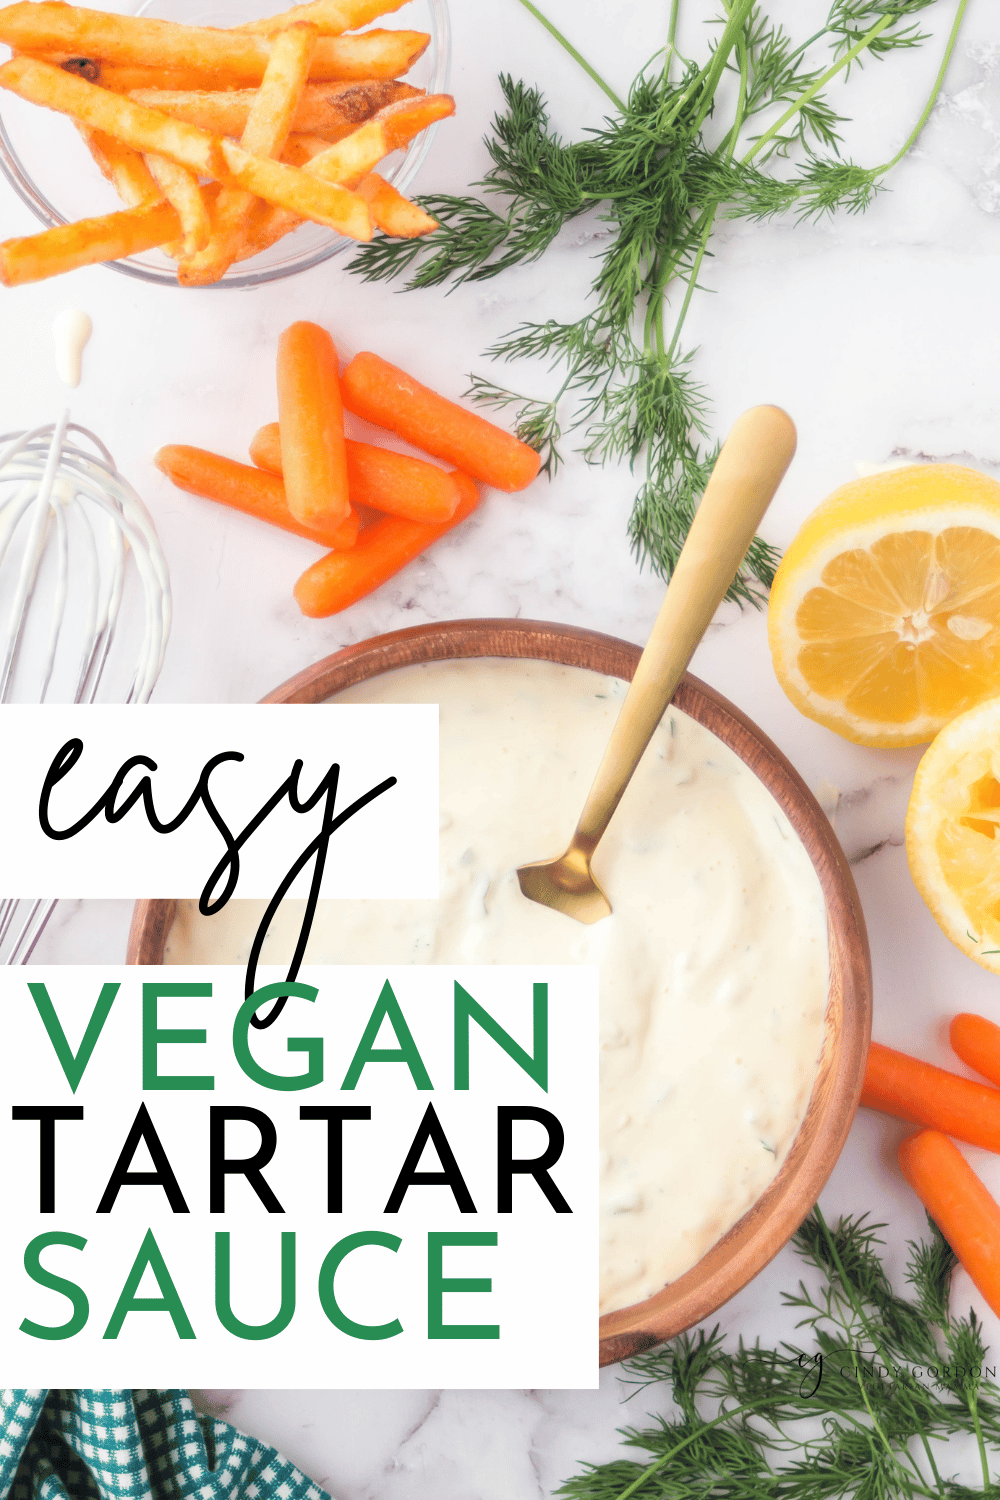 pinterest photo of vegan tarter sauce with carrots, lemons, dill, and a whisk in the photo surrounding the tarter sauce, in a wood bowl